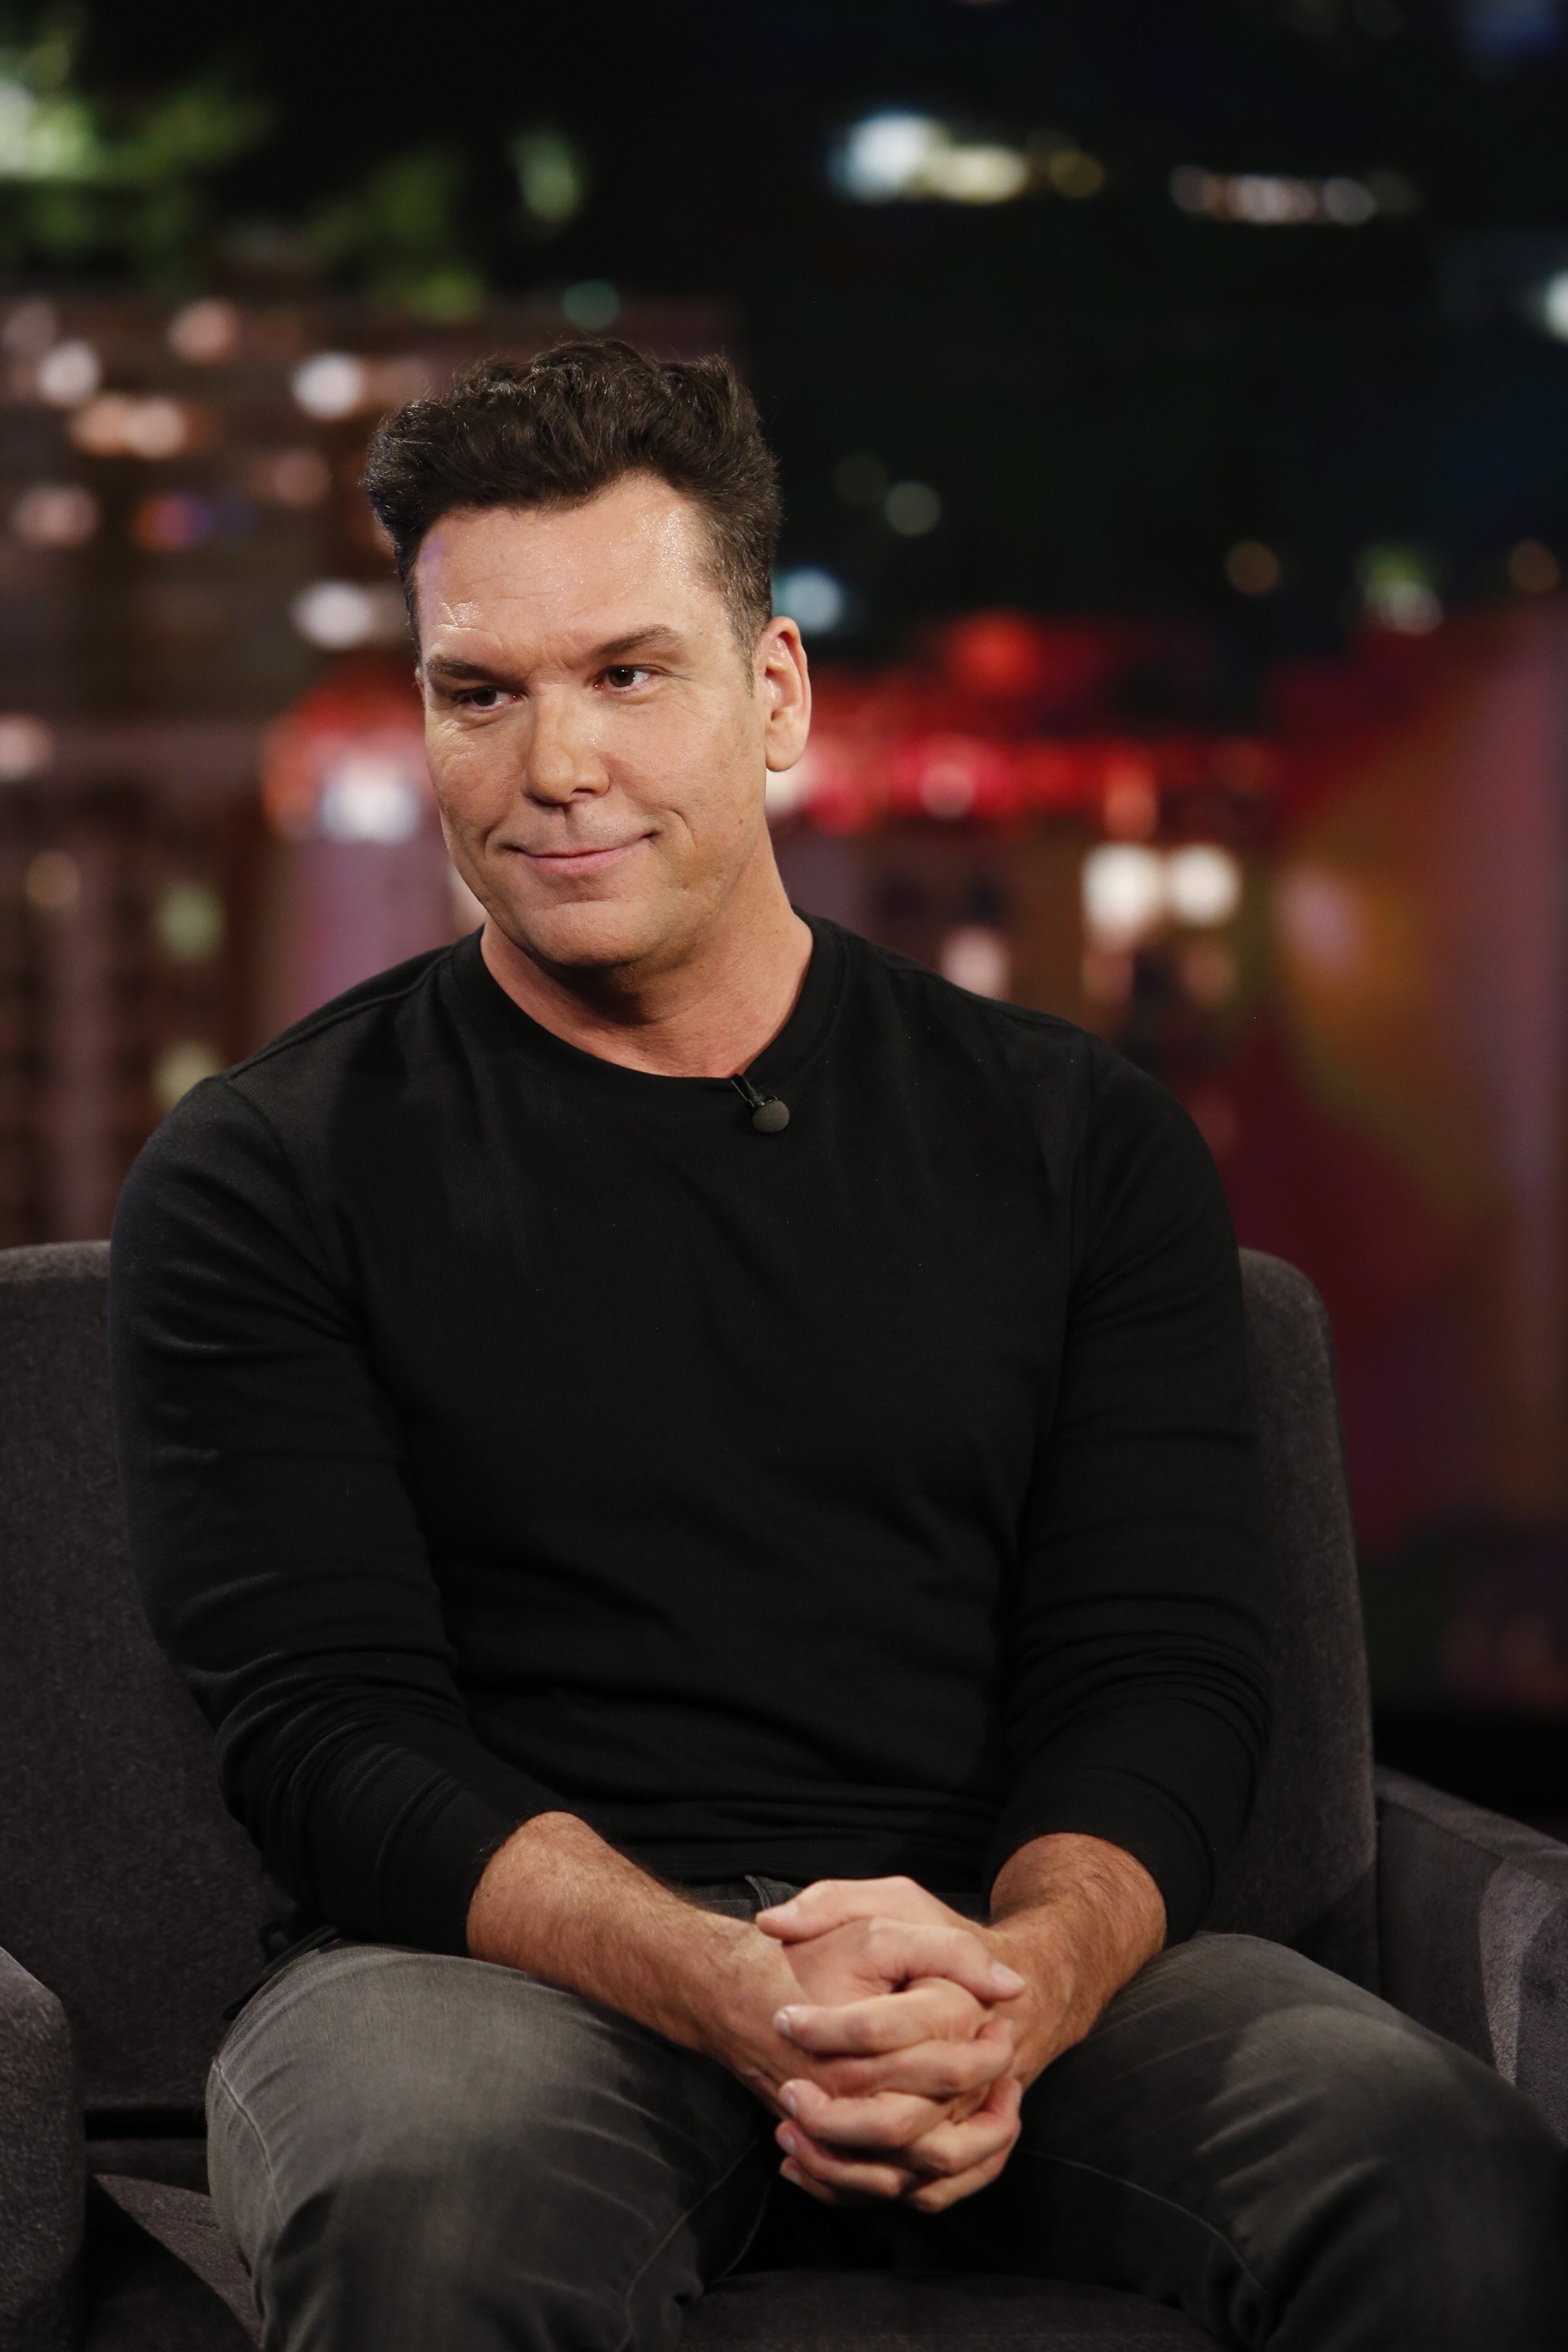 Dane Cook during an interview on “Jimmy Kimmel Live” in New York on February 14, 2019 | Source: Getty Images  